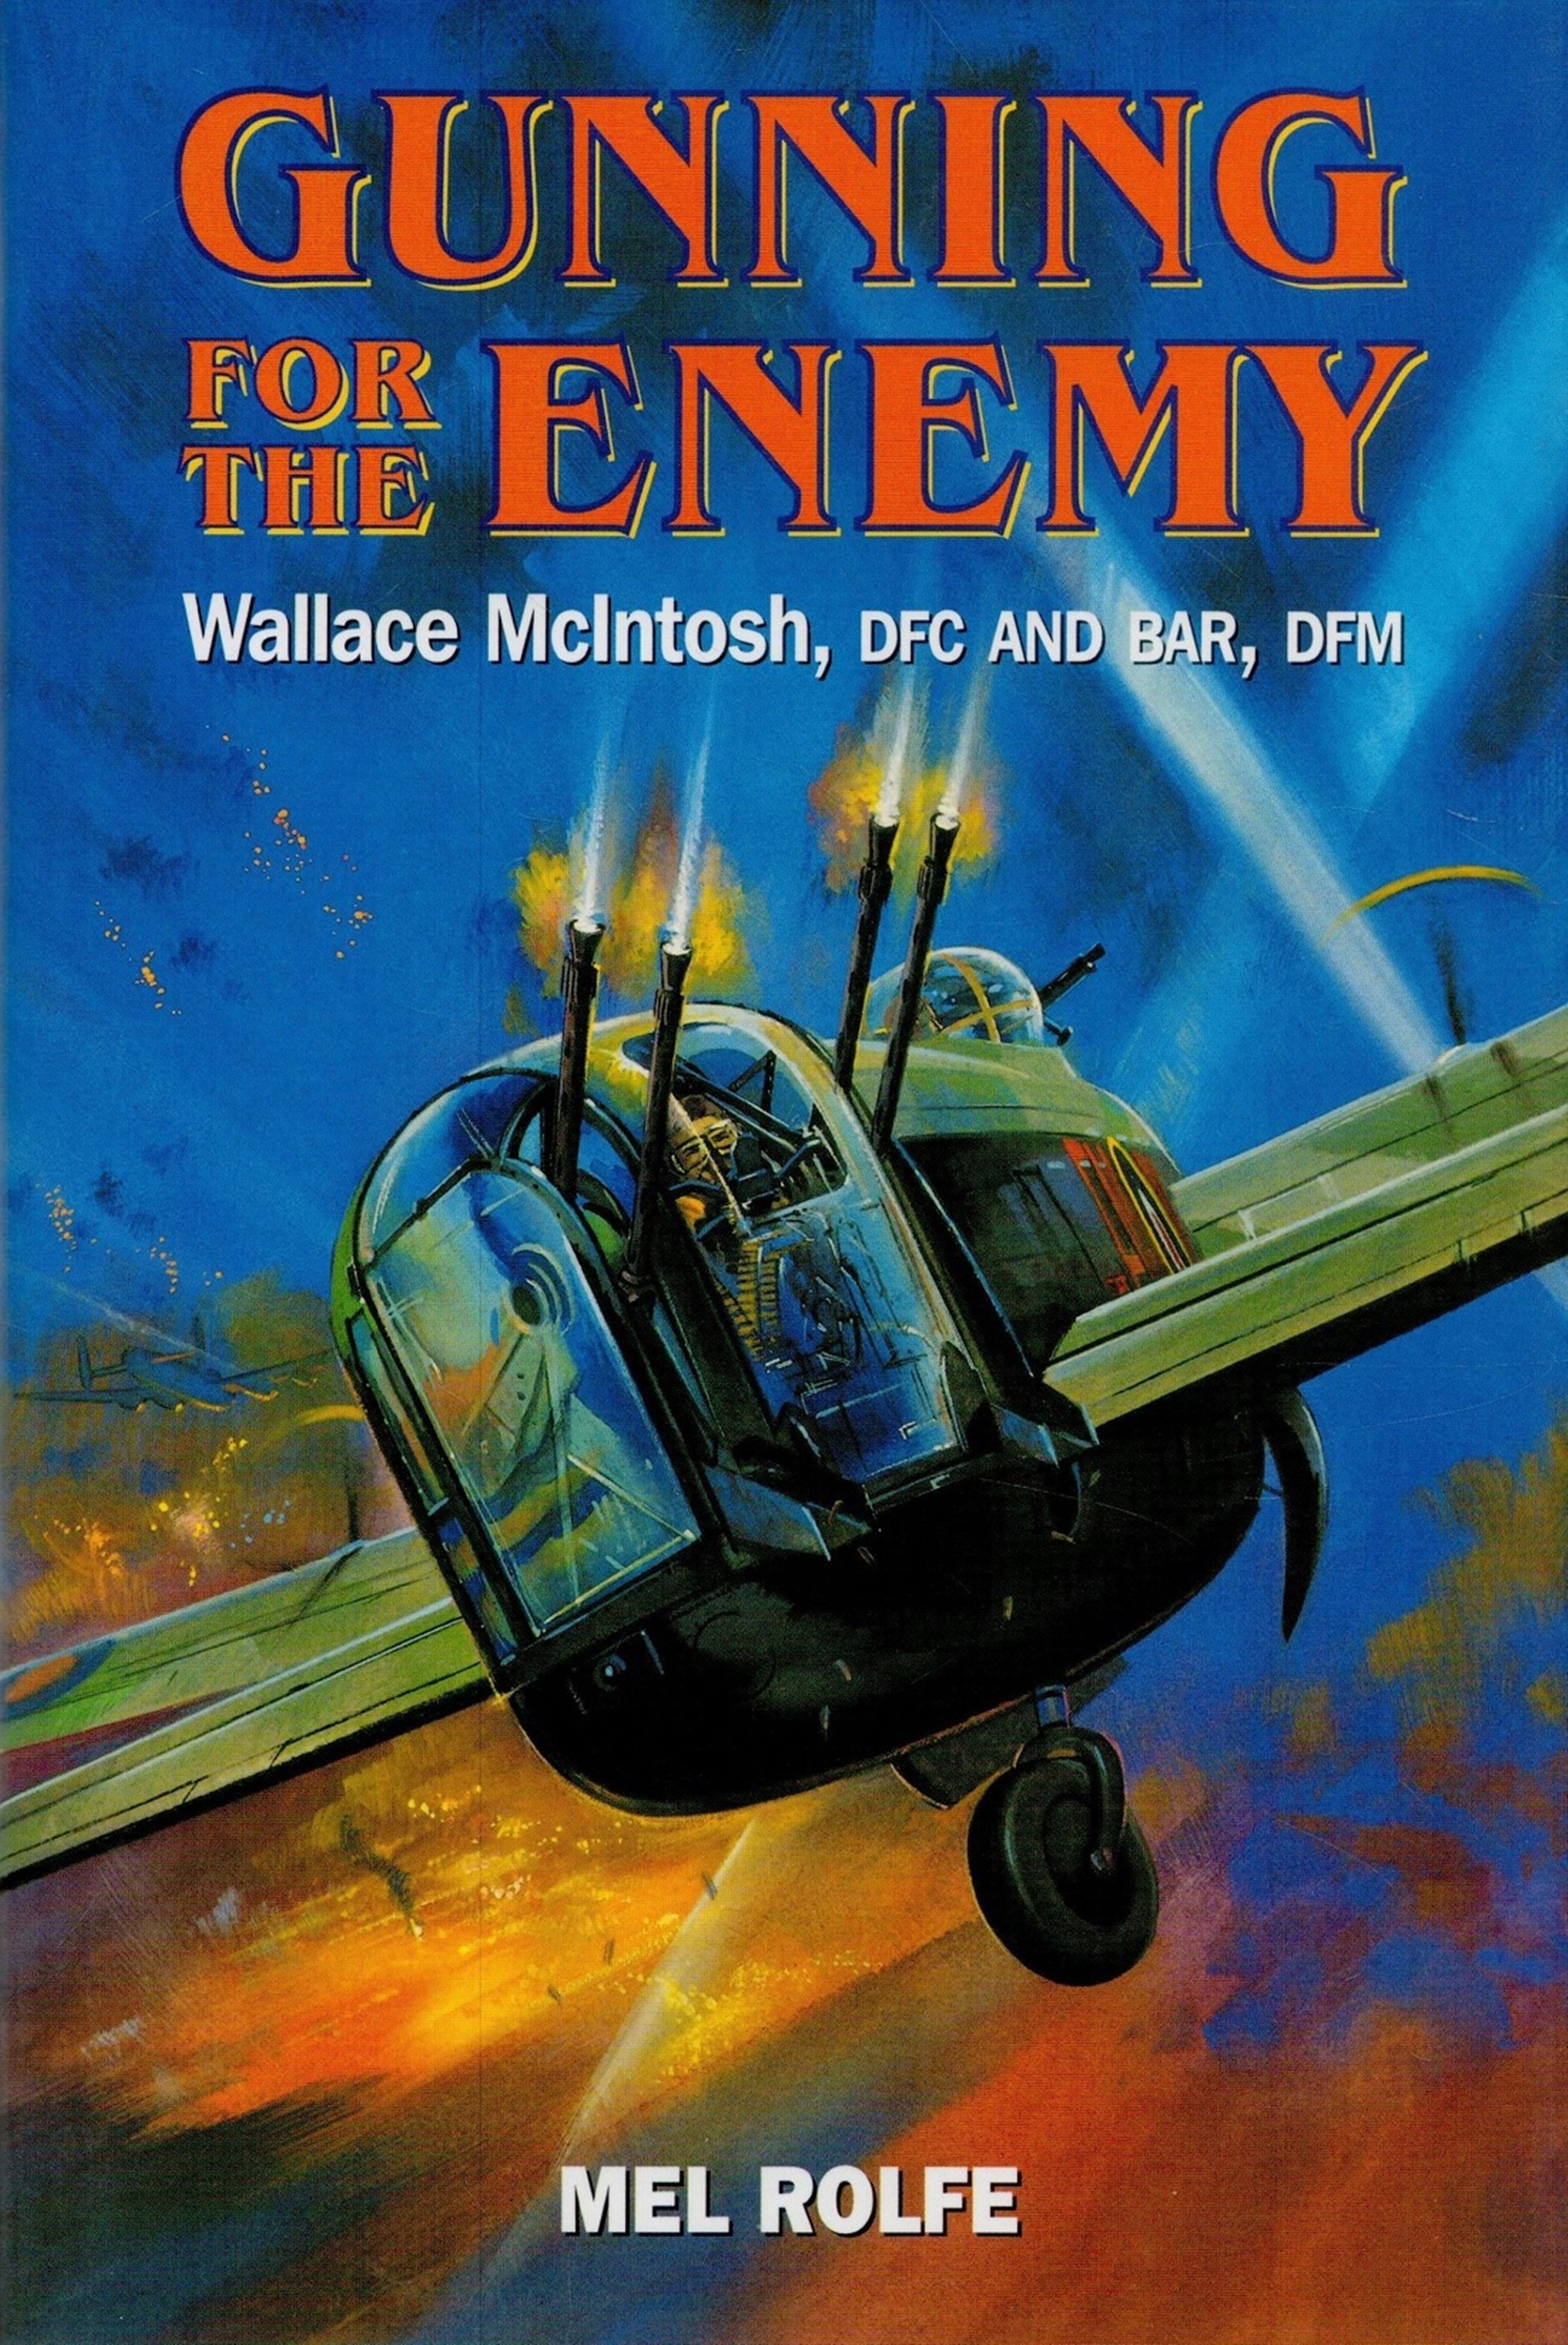 Multi-Signed Book - Gunning for The Enemy Wallace McIntosh, DFC and Bar, DFM by Mel Rolfe 2003 - Bild 3 aus 9